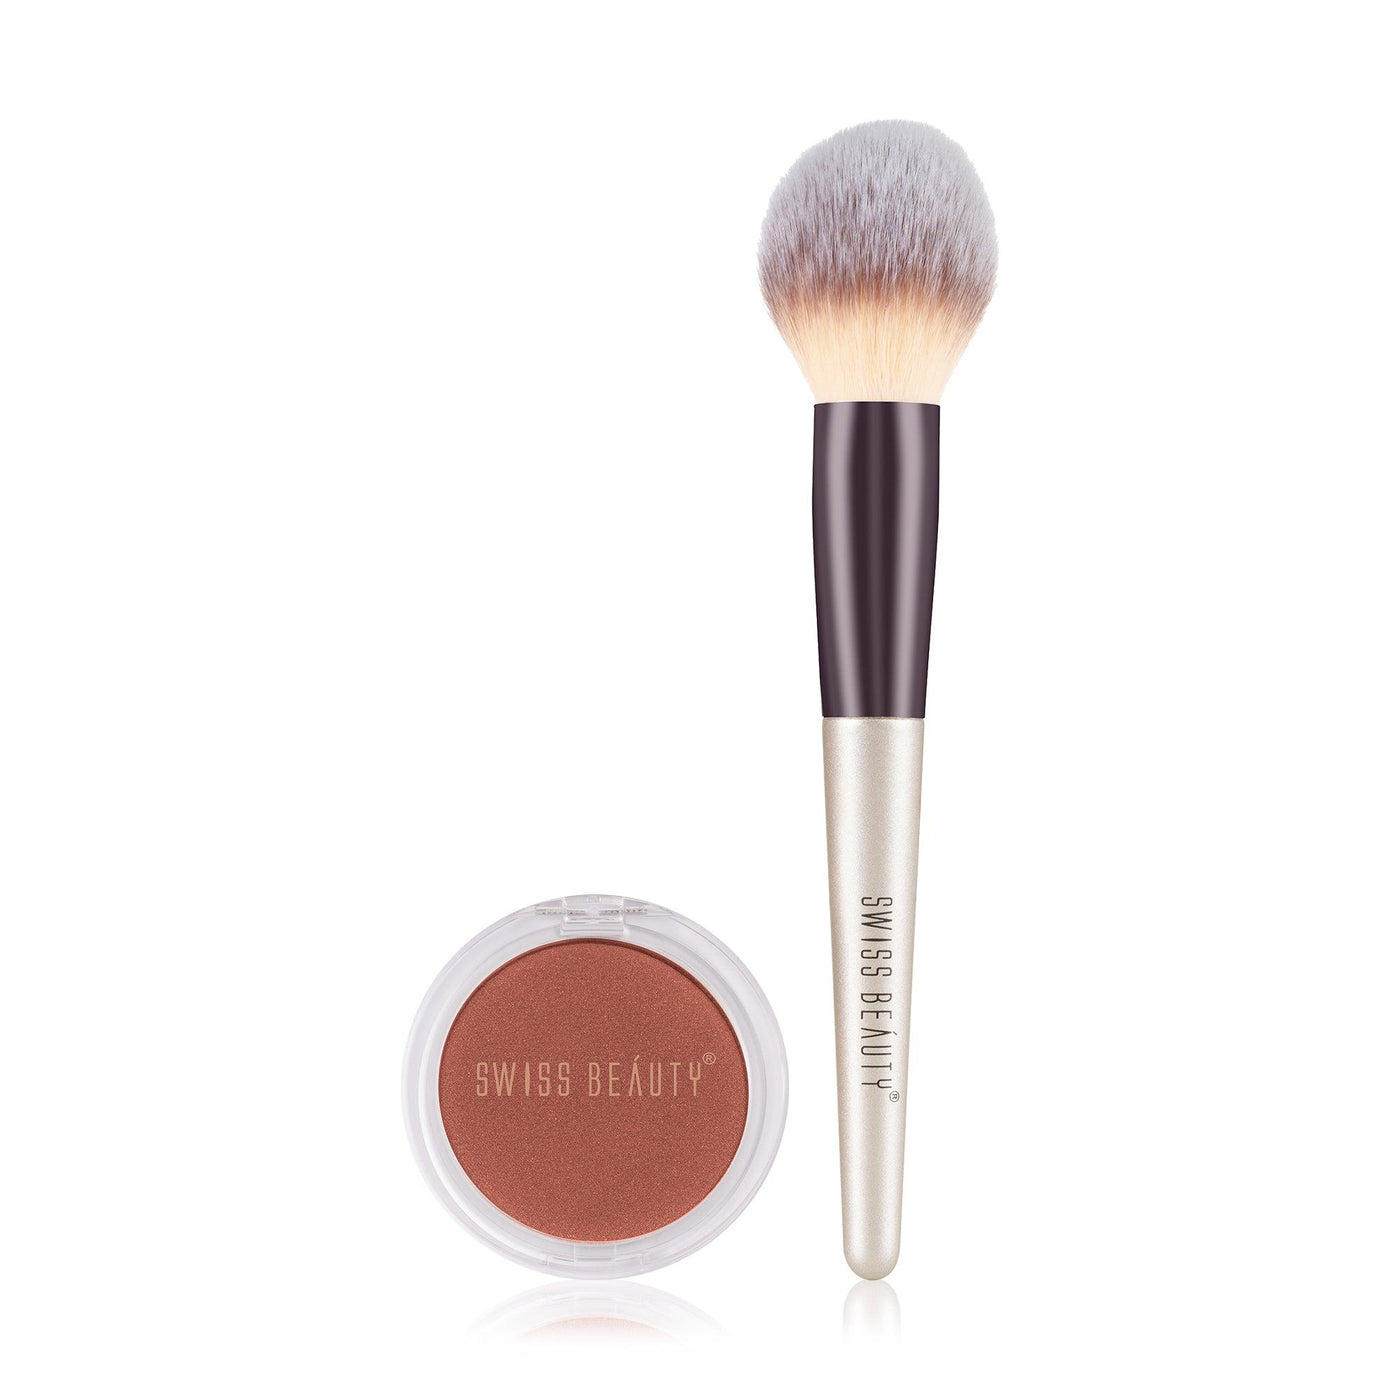 Let me Blush Blusher and Power Brush - Combo - Swiss Beauty